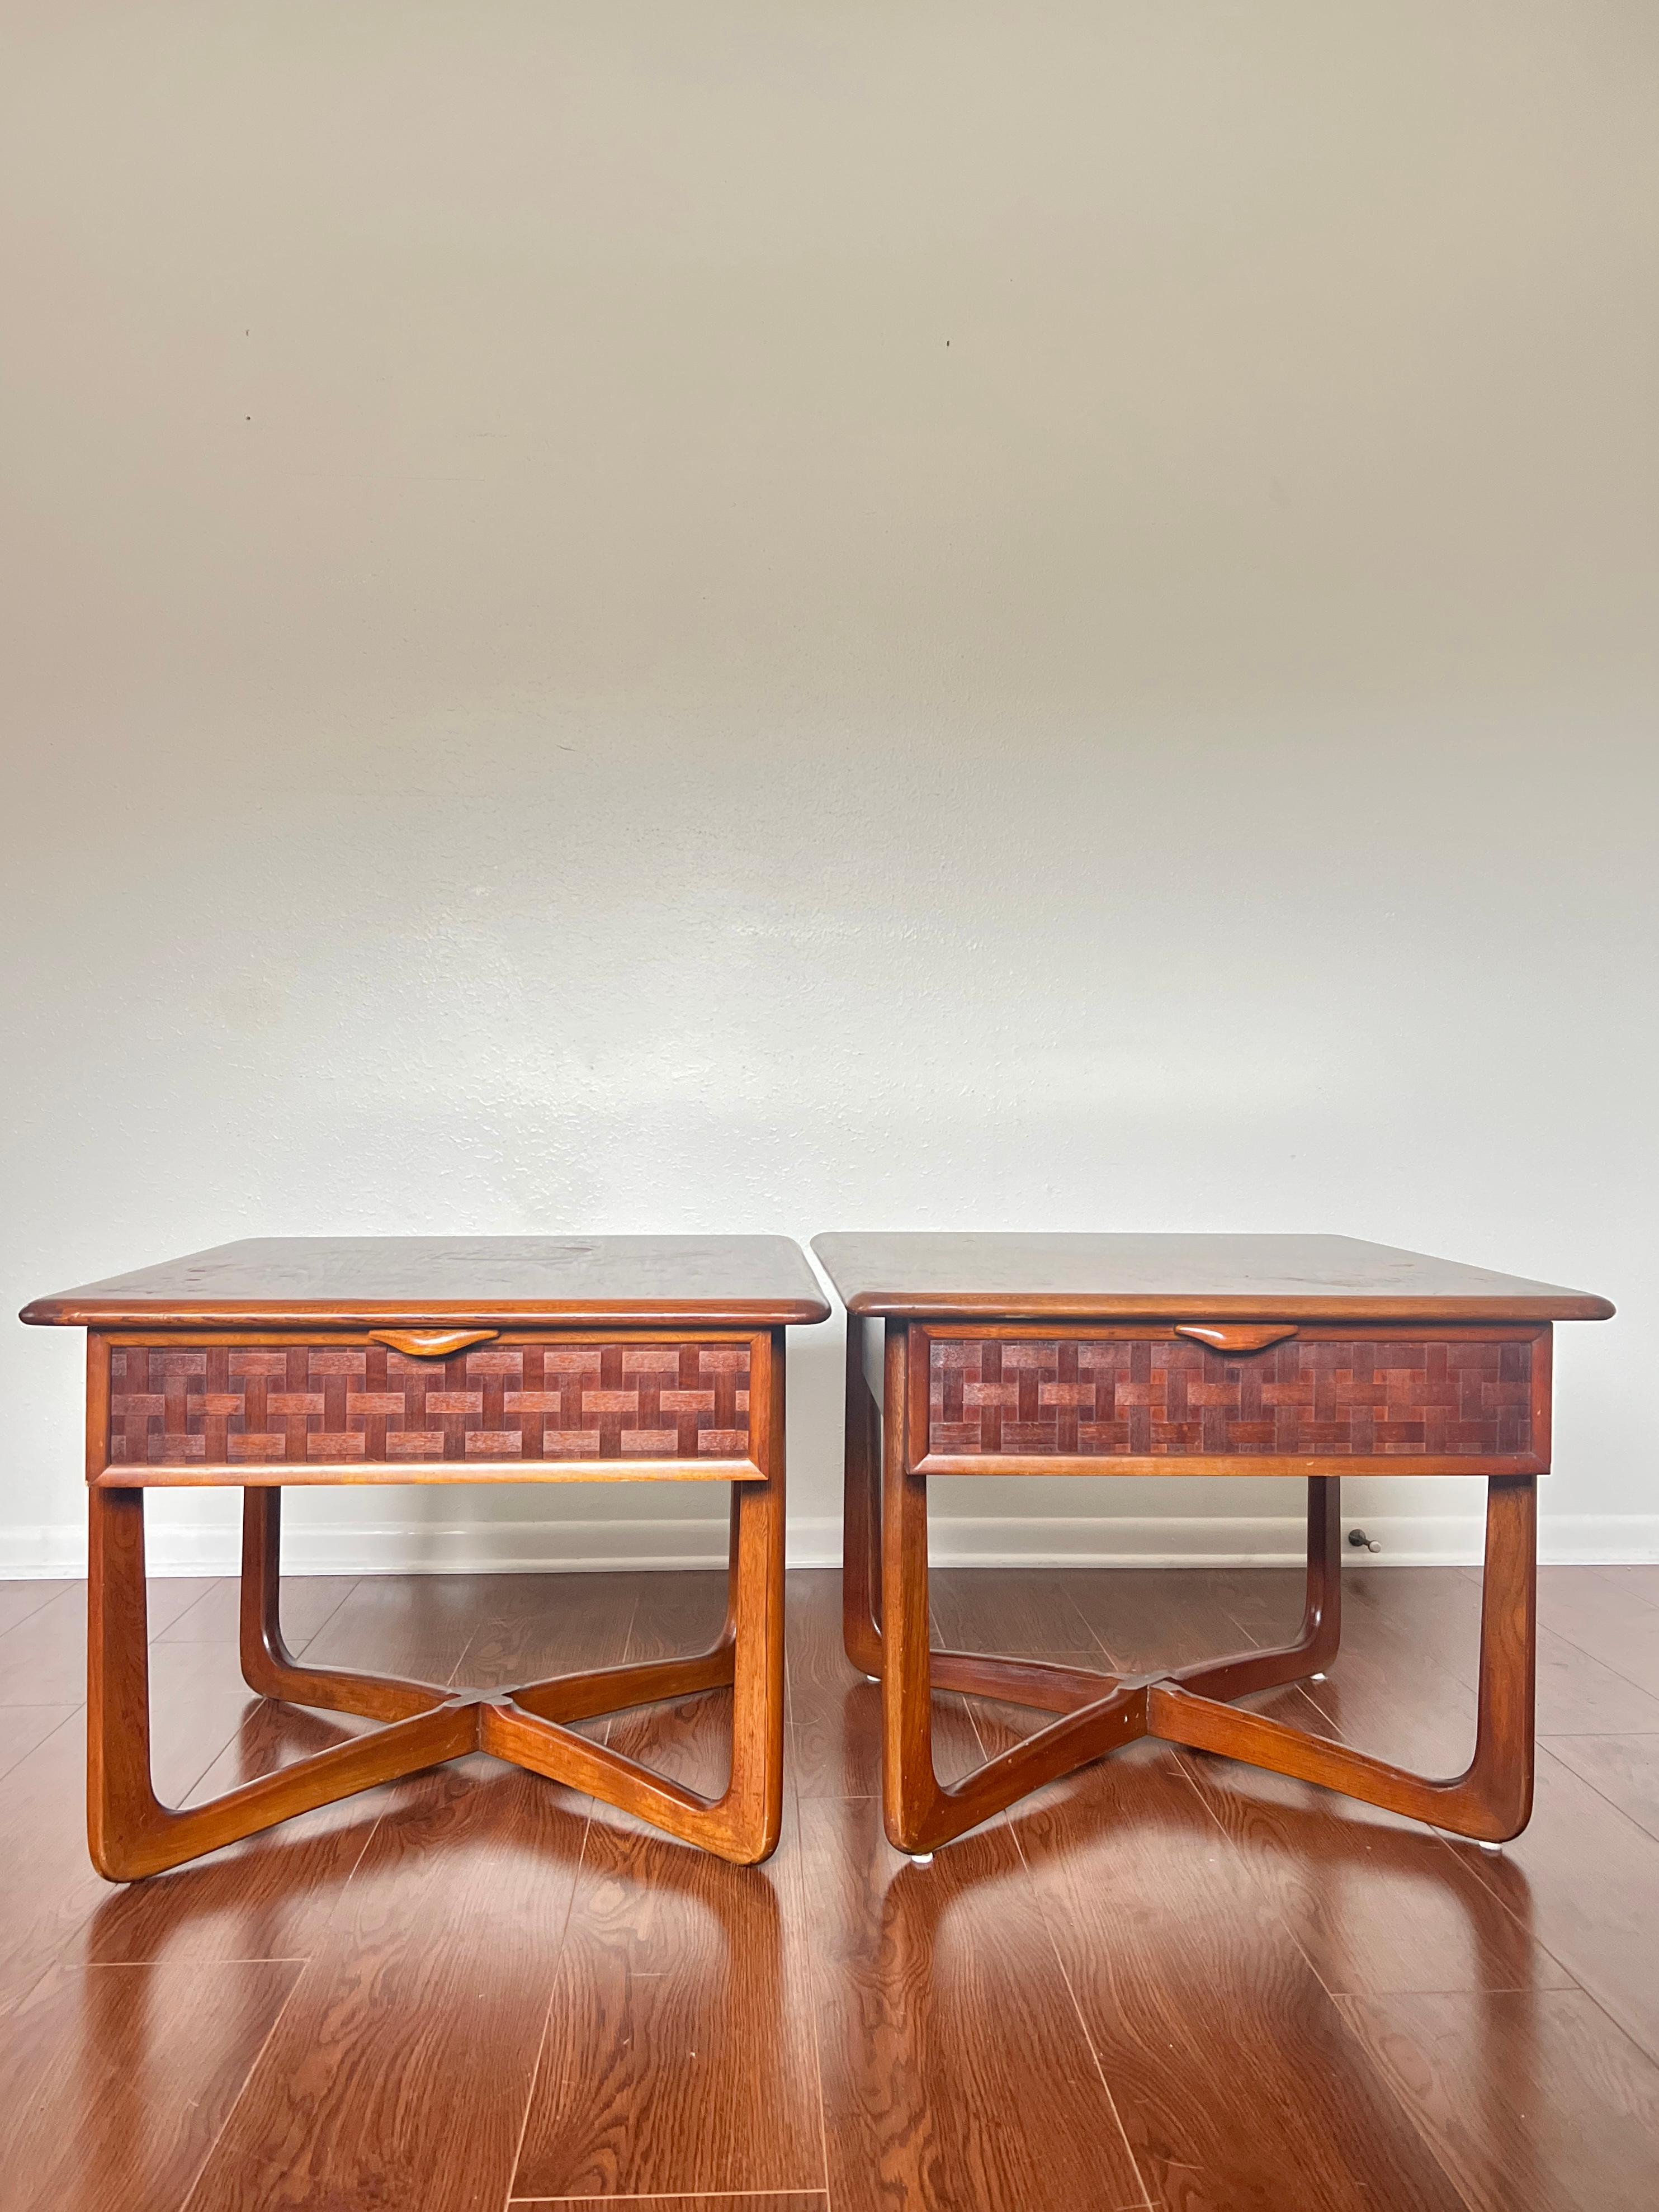 Pair of Mid-Century Modern Lane Perception Side Tables with a Cross Cross Base 1